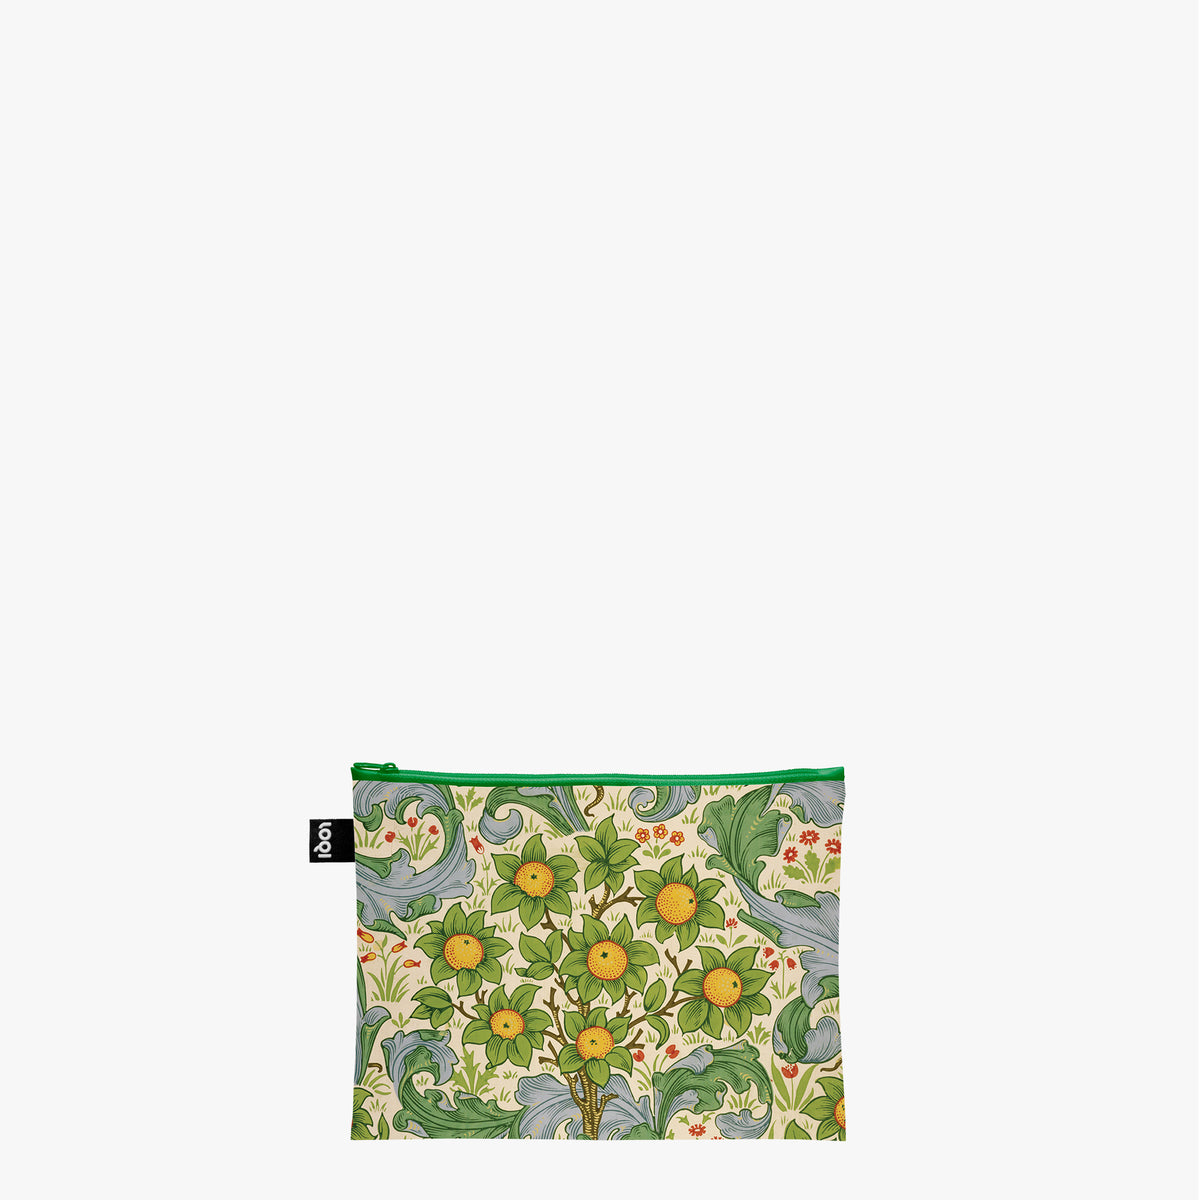 The Strawberry Thief. Decorative Fabric, Orchard. Dearle, Hyacinth Recycled Zip Pockets